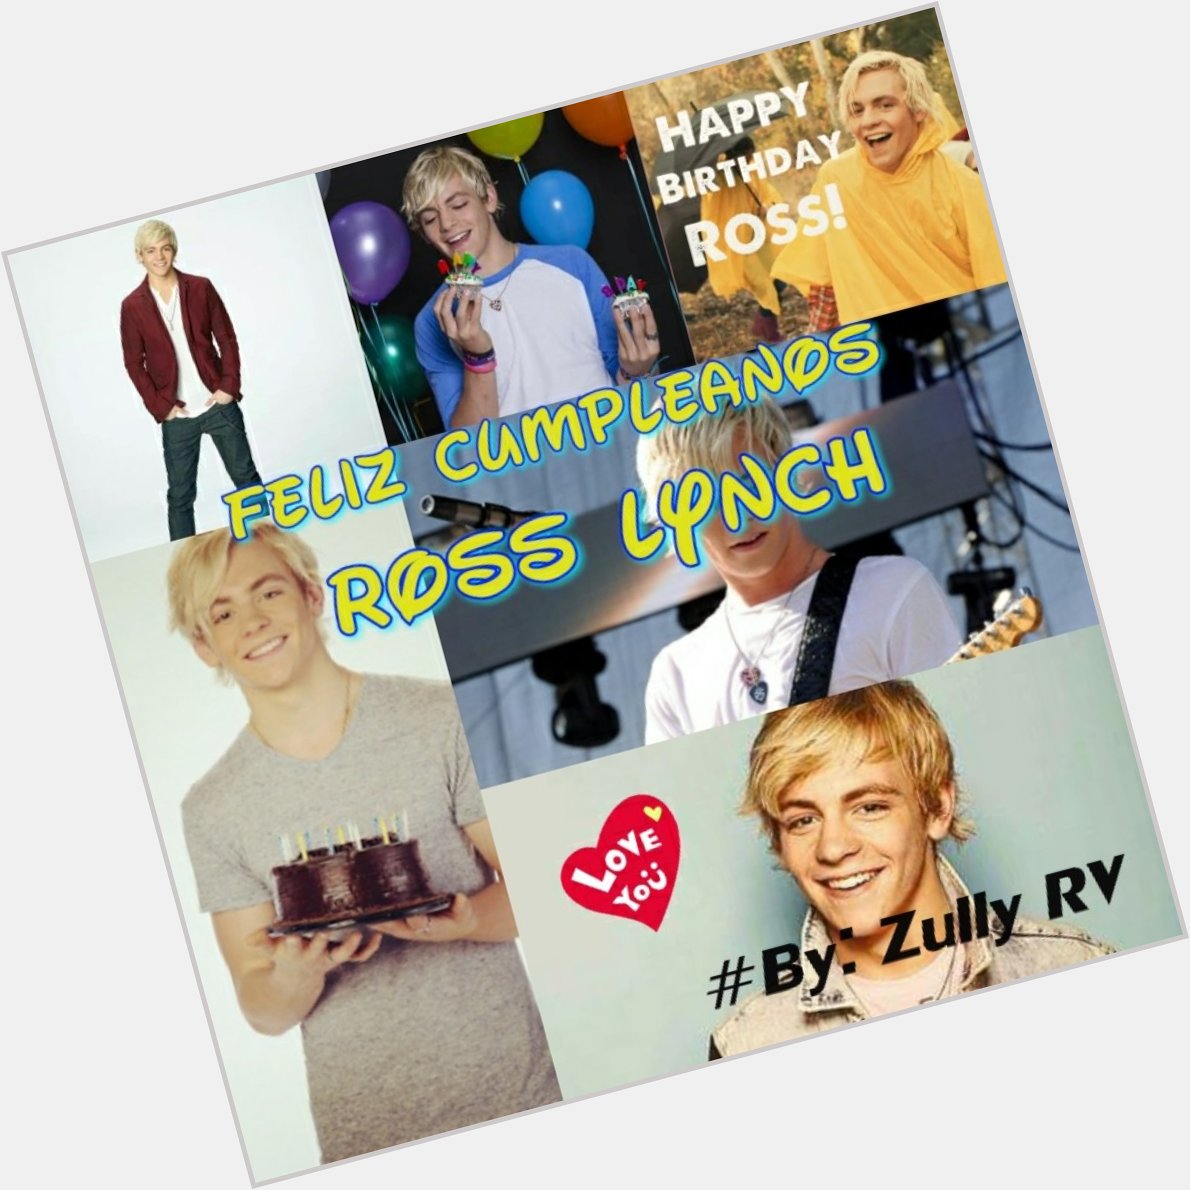  Ross Lynch happy birthday!!! , greetings from Perú :) <3 I wish you much success and blessings I love you <3 